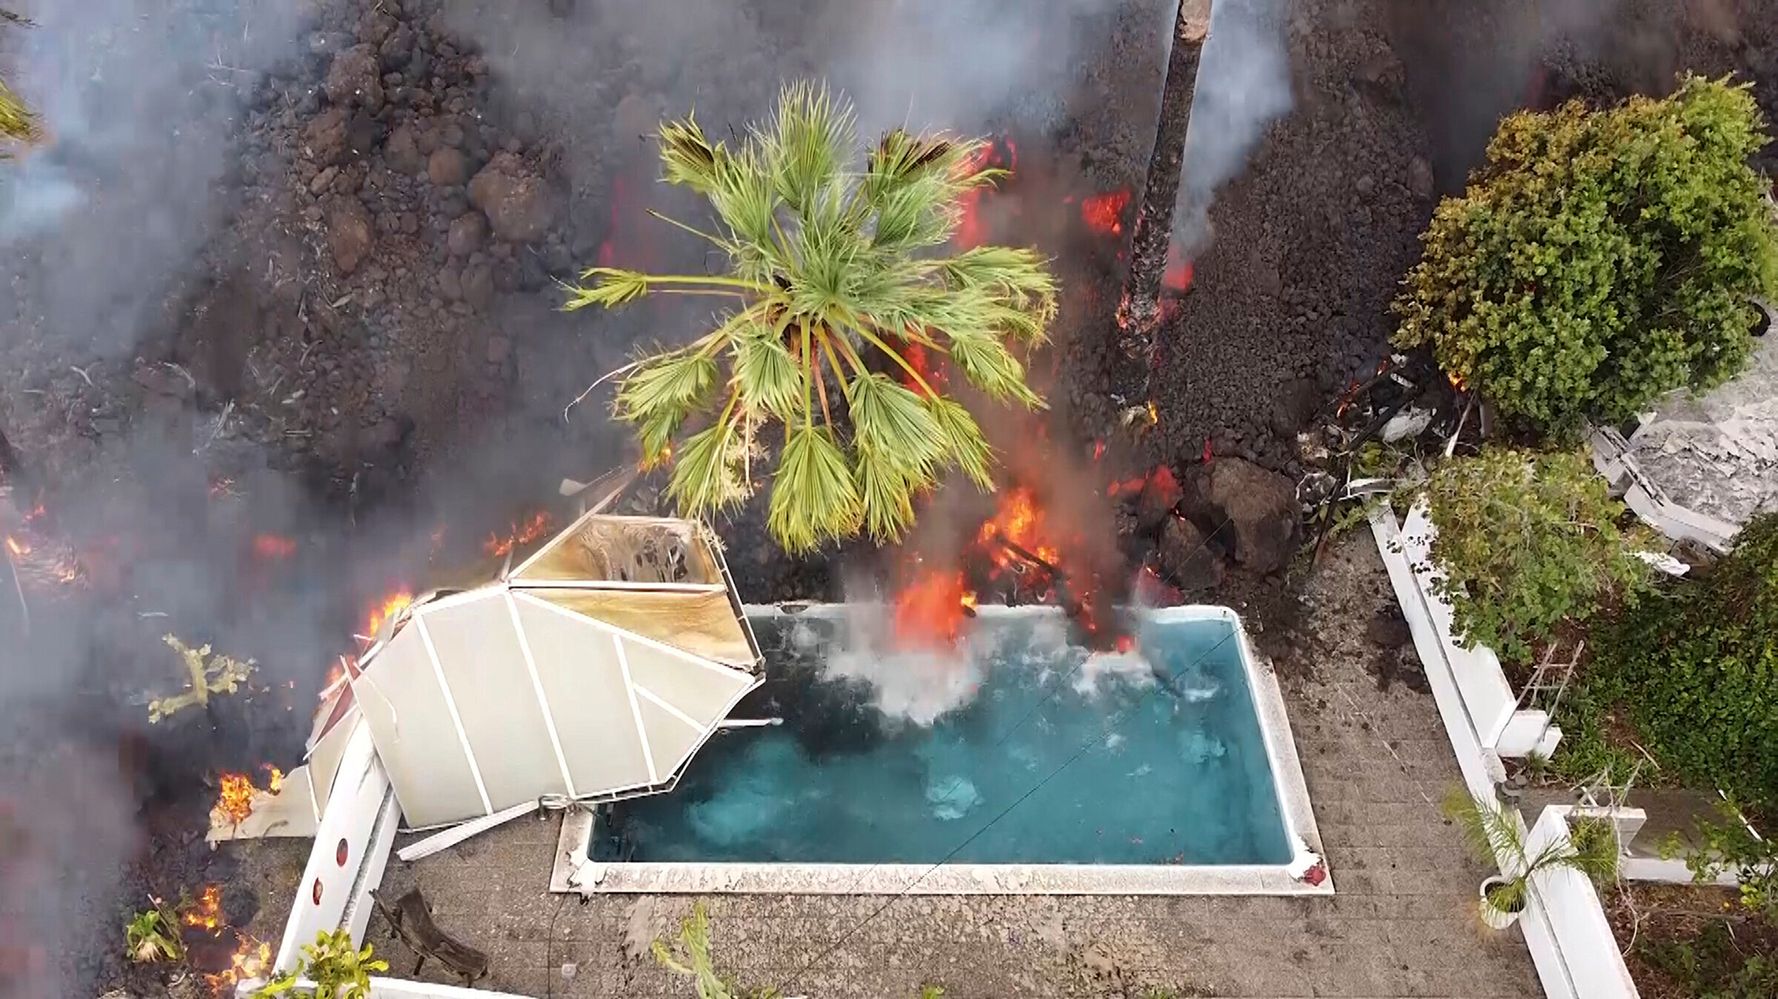 Lava From Spanish Volcano Slows Down, Sparking Fears Of Further Devastation